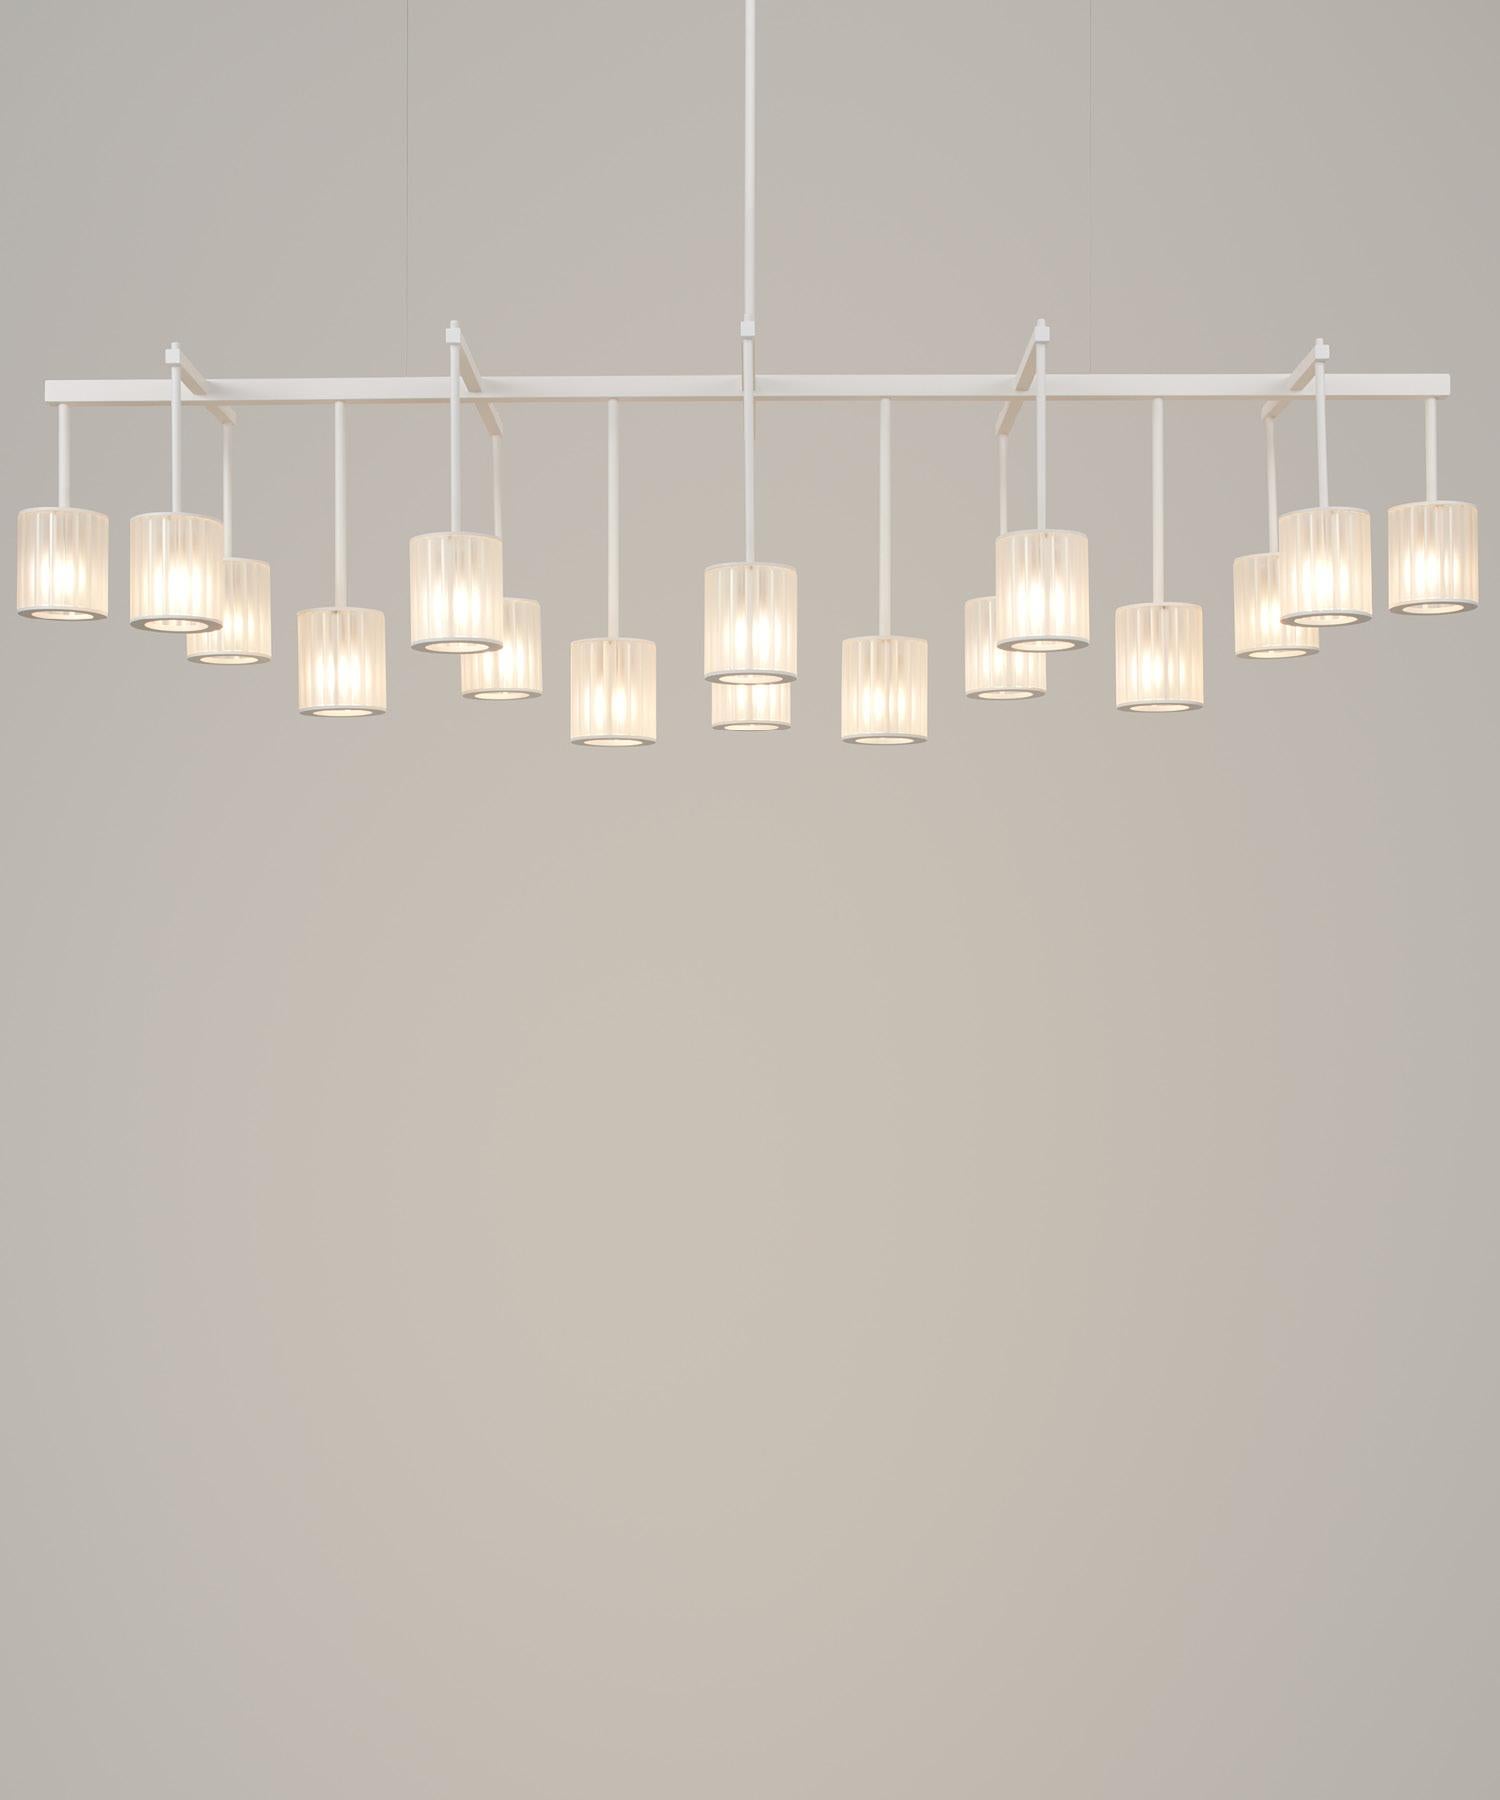 The largest member of the Flute family, the Flute Beam Chandelier is available in two standard sizes and is perfectly suited to formal dining areas and living spaces. The textured powder coat or rich, brushed-brass finish can be combined with the